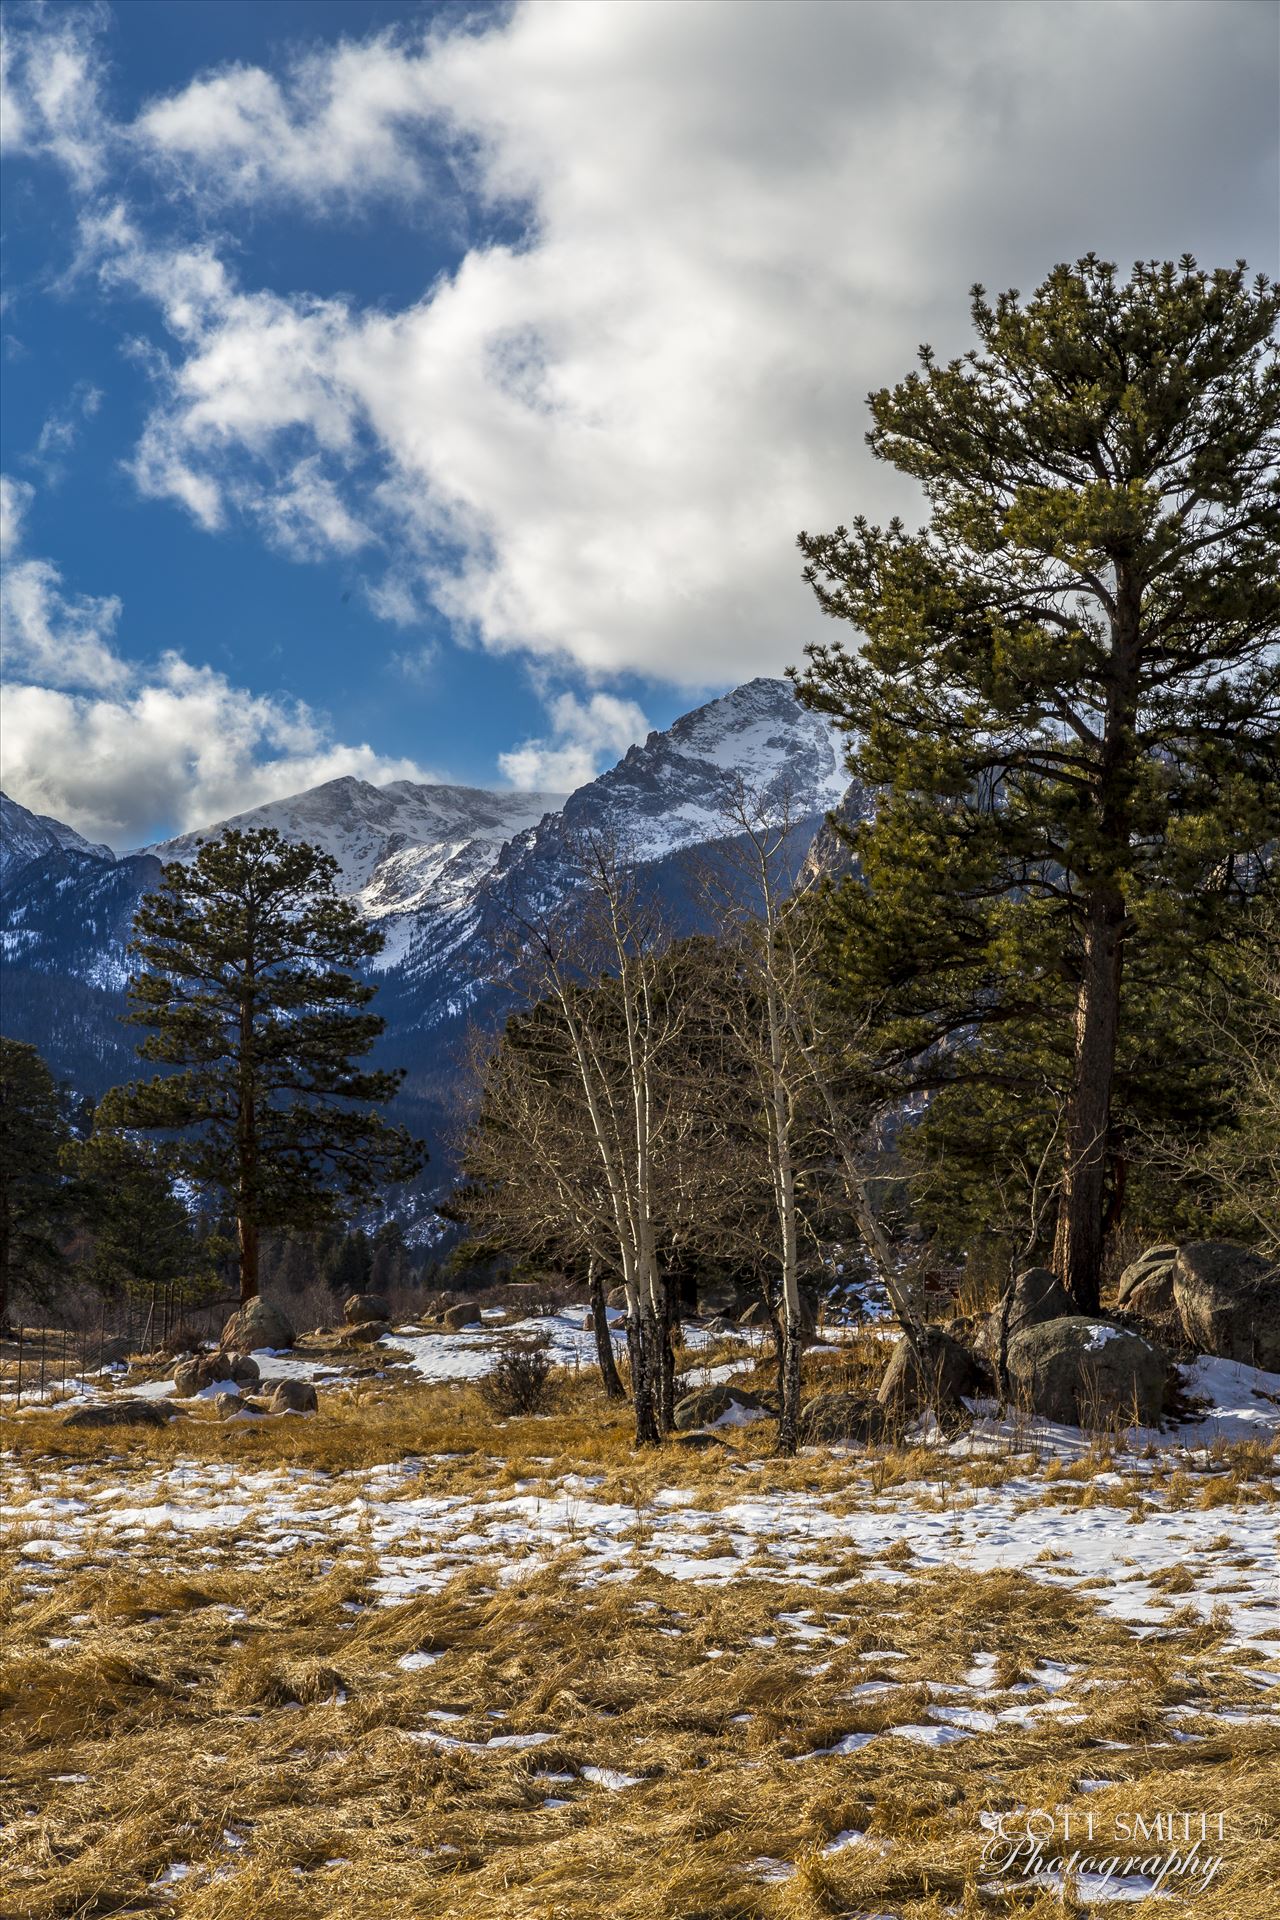 Winter at Bear Lake Road - Winter's begun, taken just off Bear Lake Road in the Rocky Mountain National Park. by Scott Smith Photos